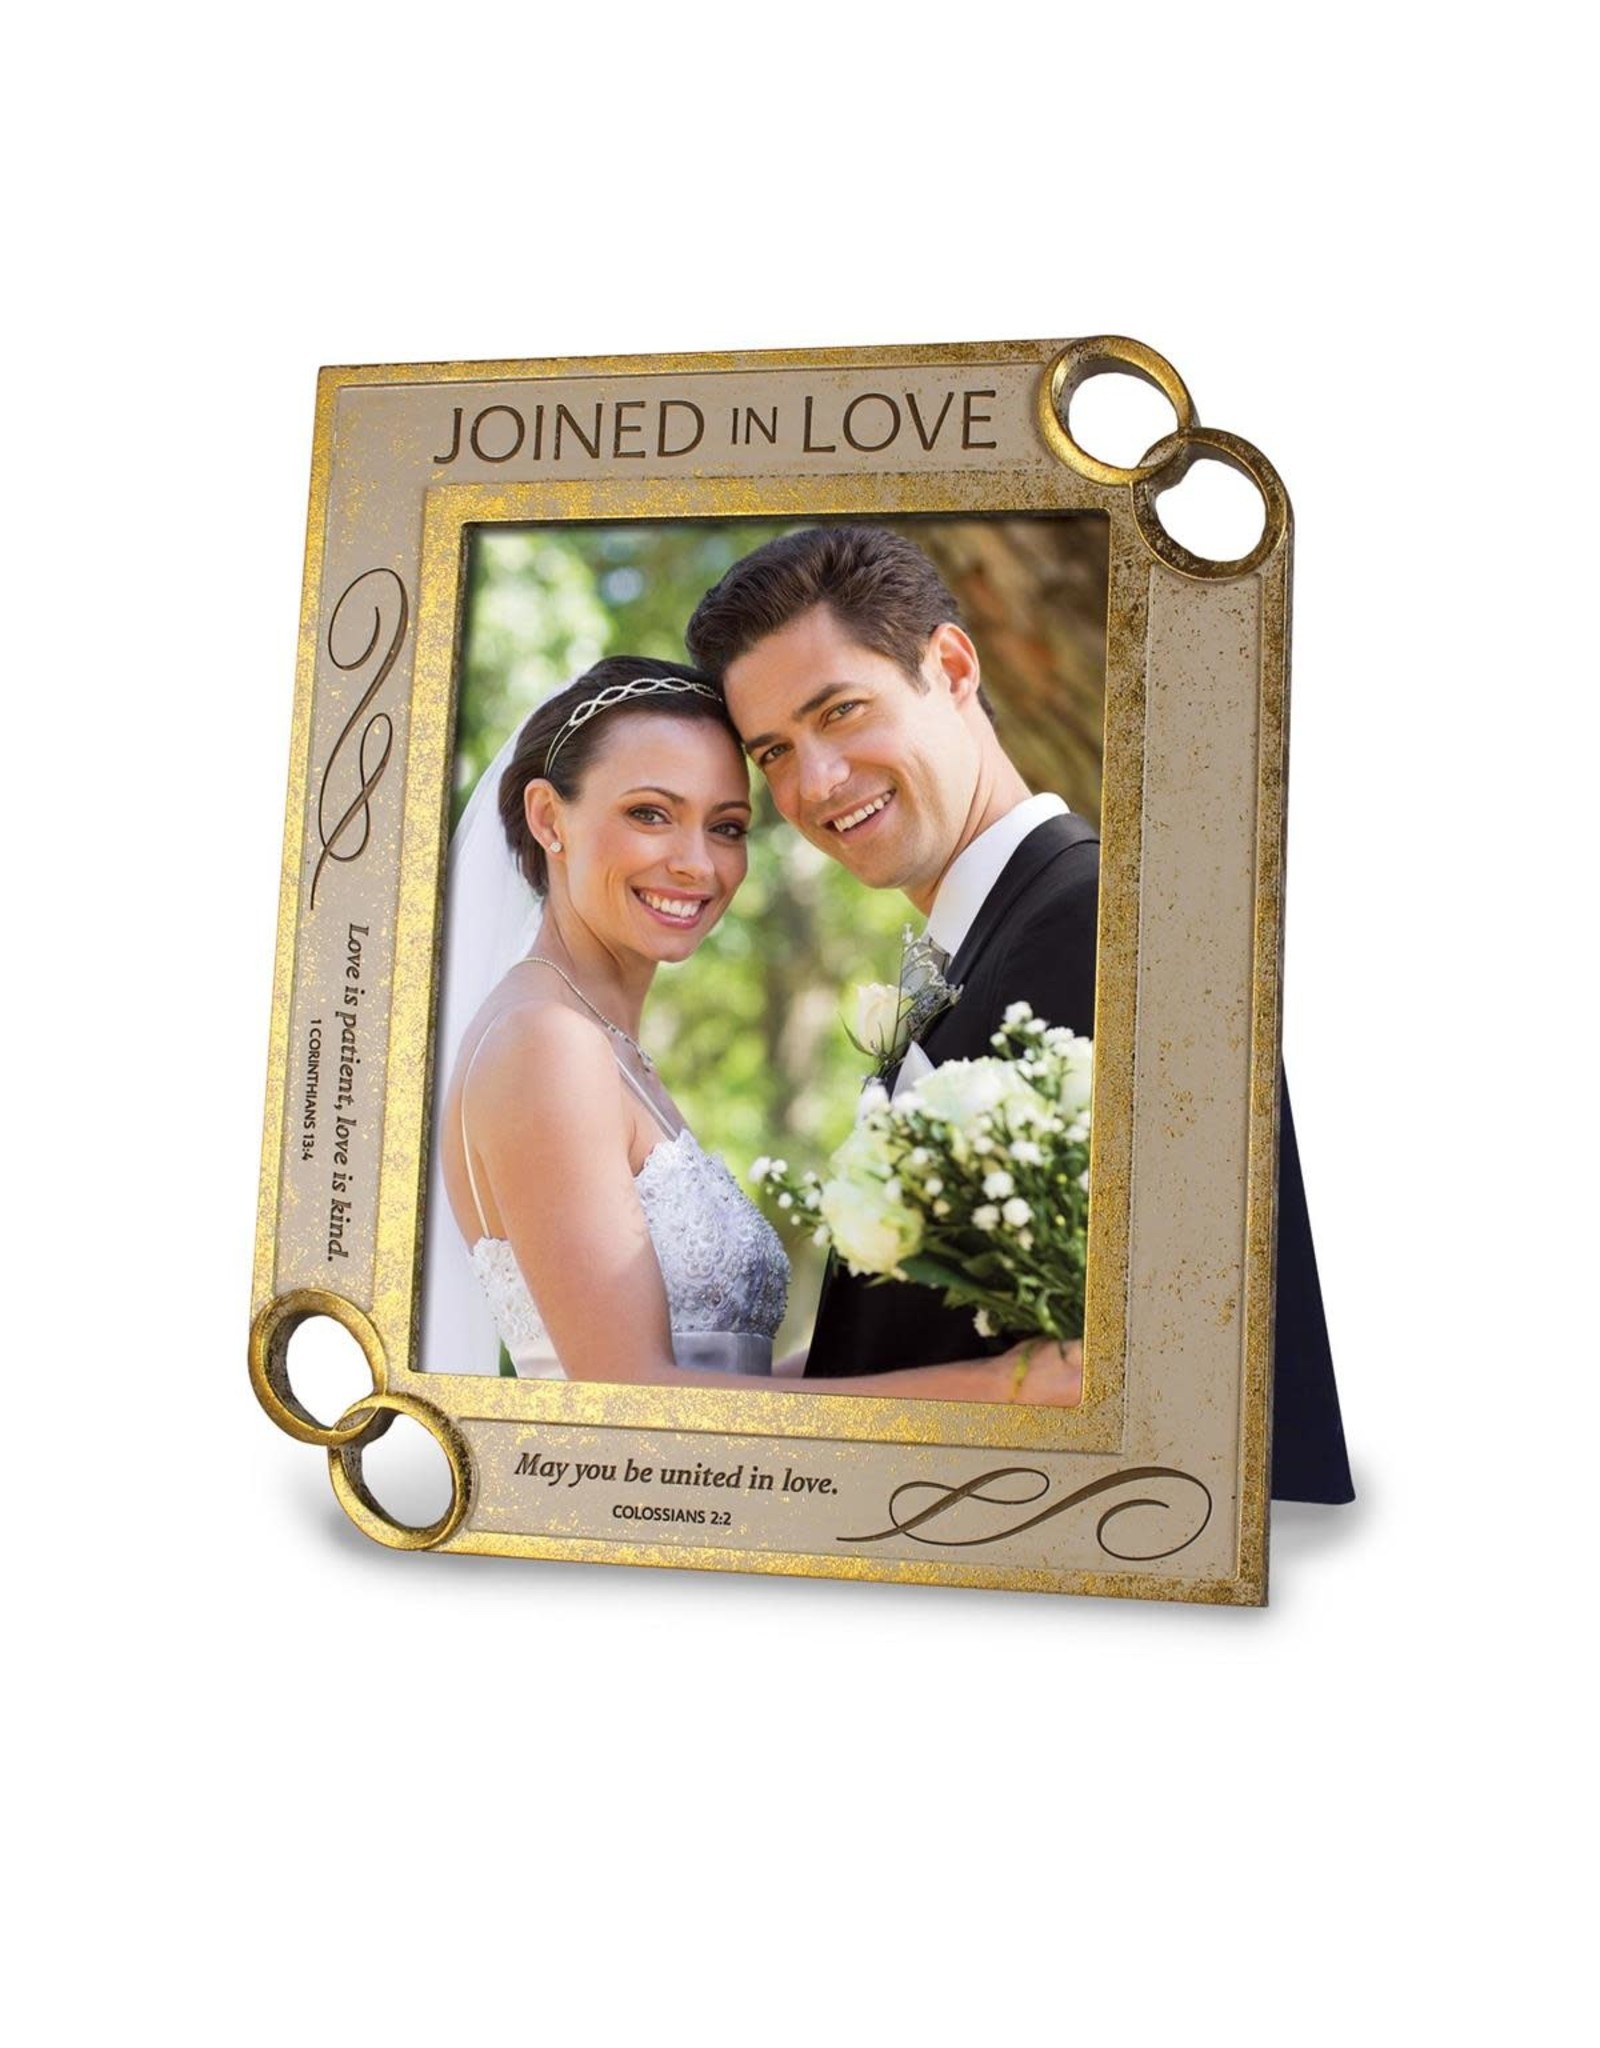 Dicksons Wedding Picture Frame - Joined in Love 8x10